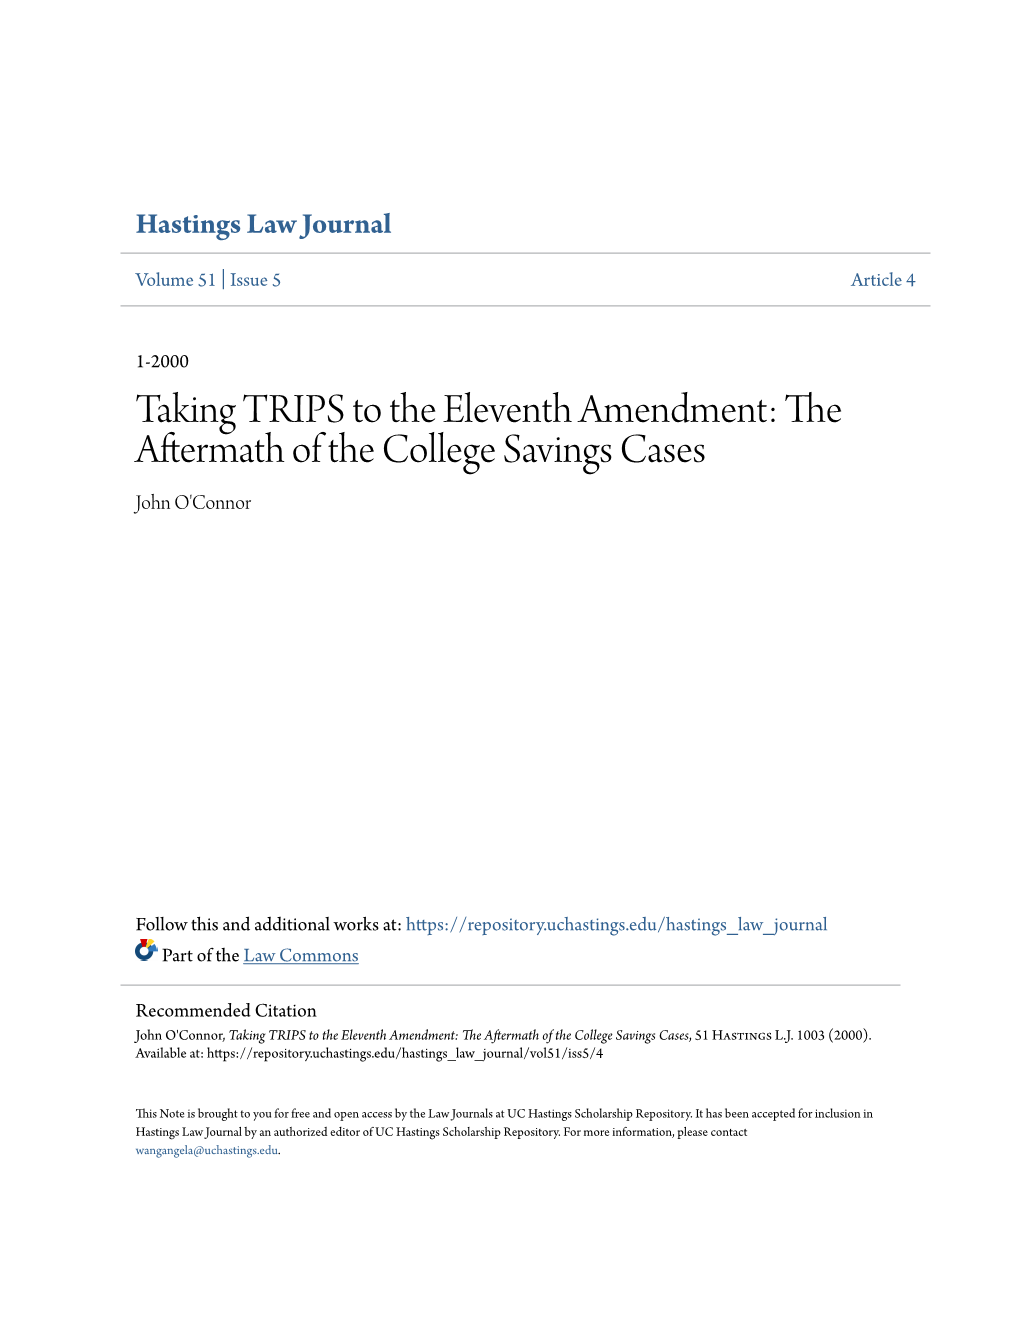 Taking TRIPS to the Eleventh Amendment: the Aftermath of the College Savings Cases John O'connor